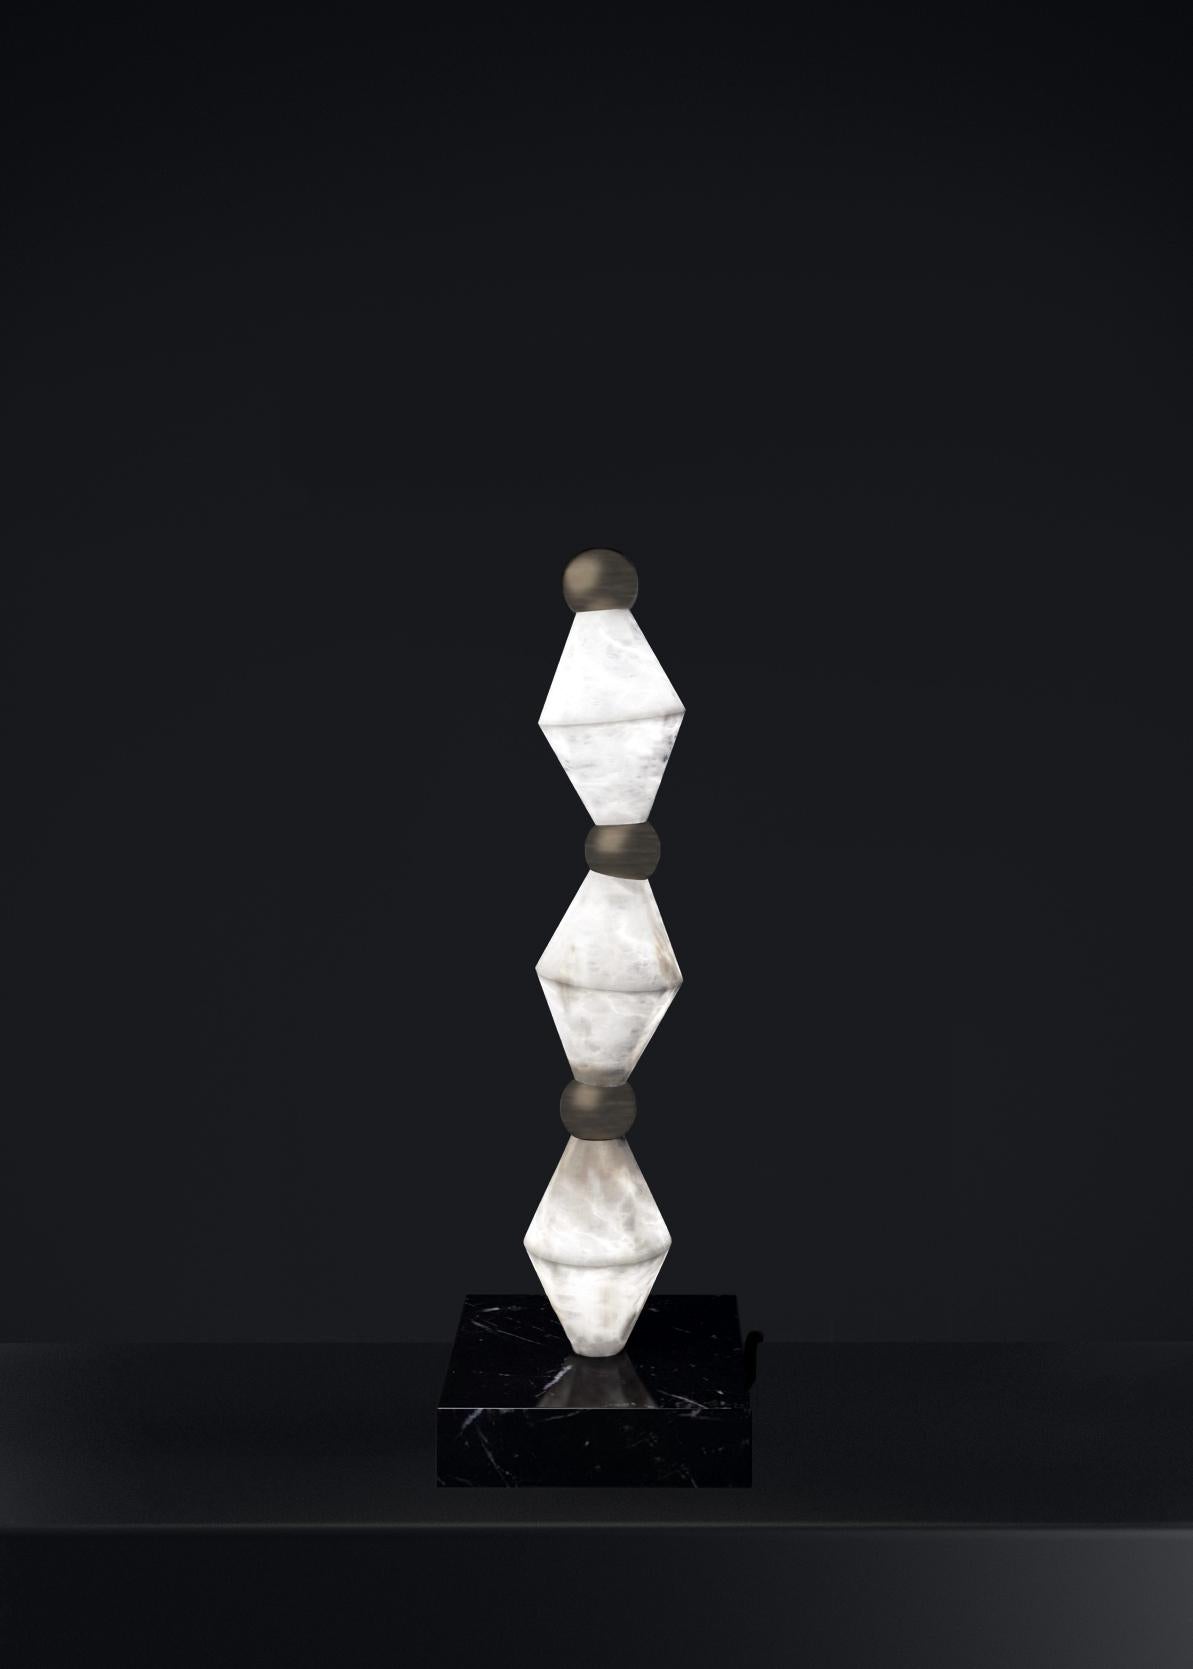 Chronos Brushed Burnished Table Lamp by Alabastro Italiano
Dimensions: D 15 x W 15 x H 71,5 cm.
Materials: White alabaster, marble and metal.

Available in different finishes: Shiny Silver, Bronze, Brushed Brass, Ruggine of Florence, Brushed